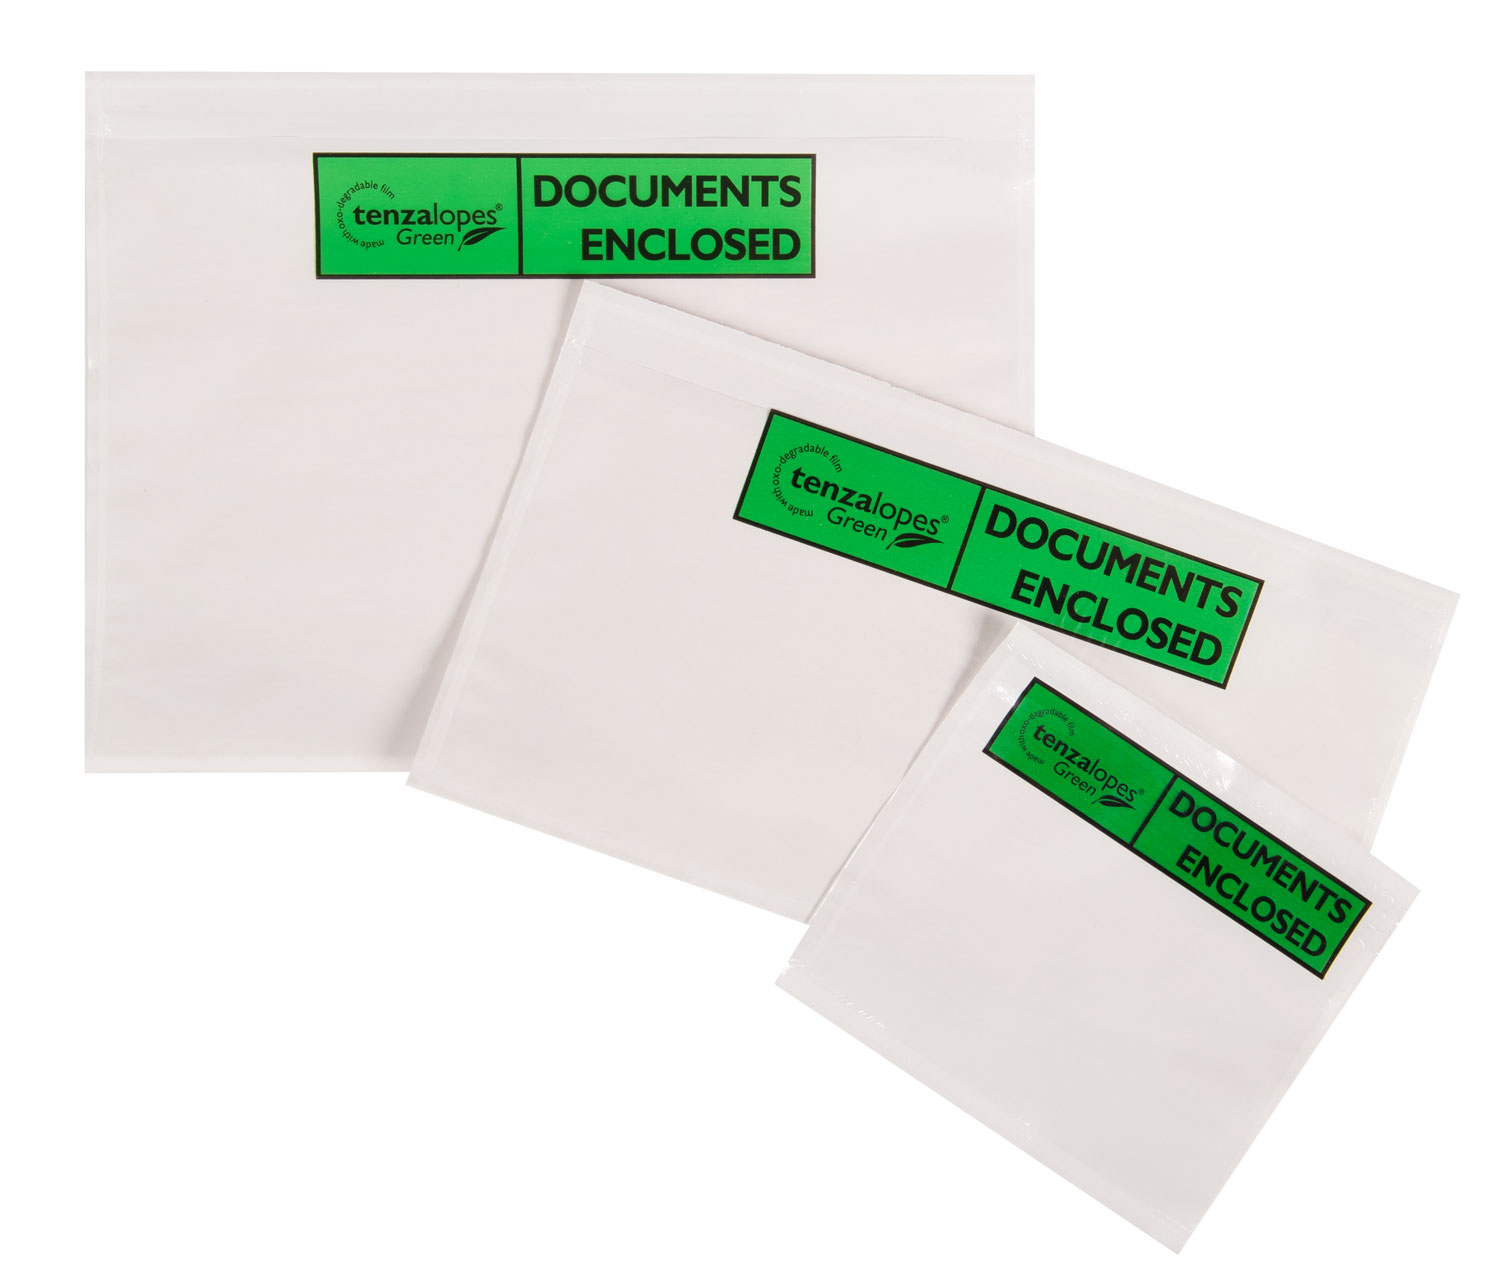 Tenzalopes Green Document Wallets, biodegradable, A5 size (printed DOCUMENTS ENCLOSED), Price per Box 1000